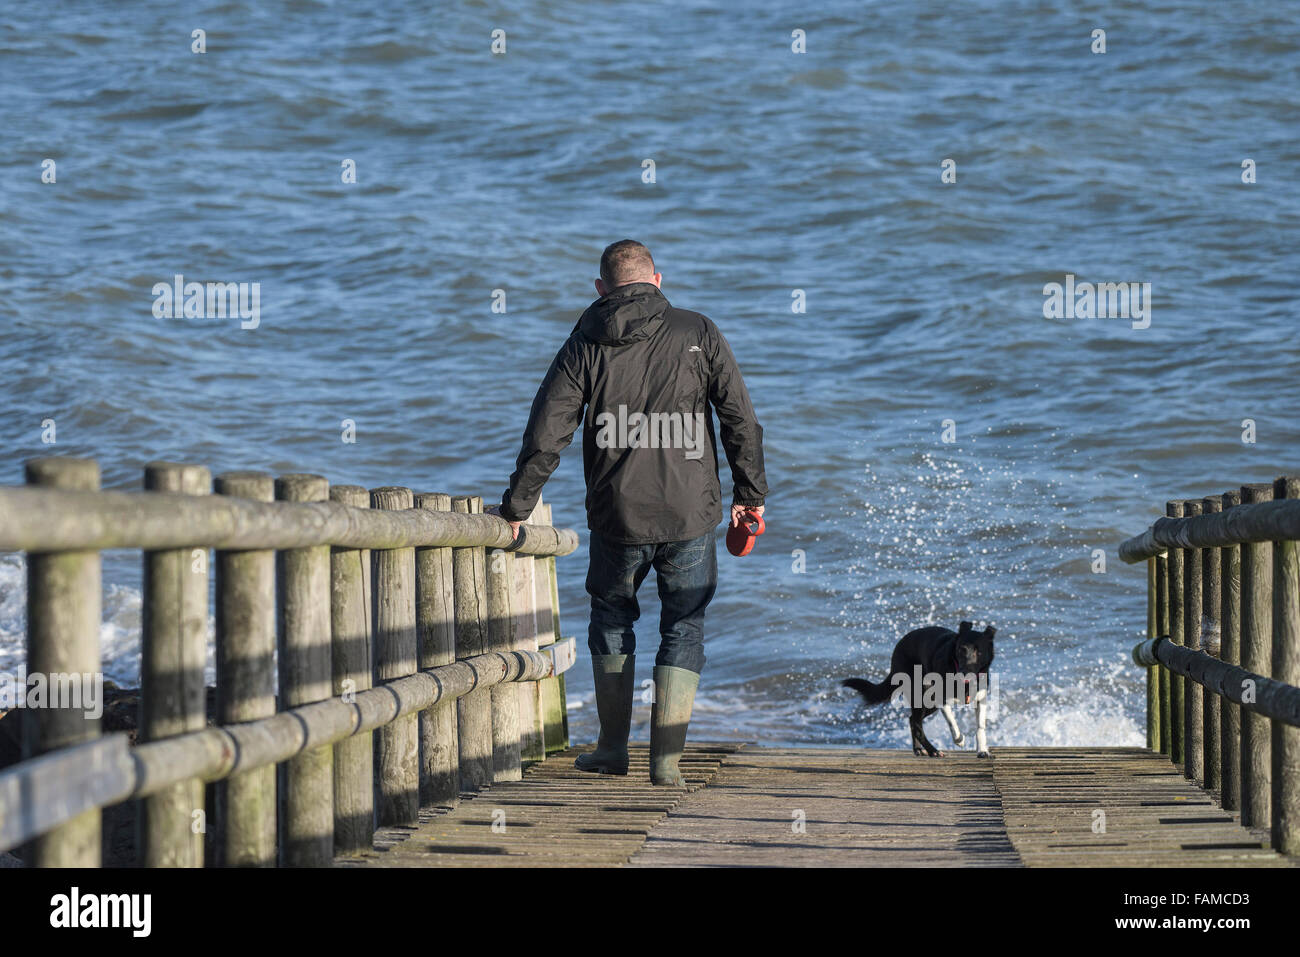 Man and his dog - a man and his dog walking on a wooden walkway on the Thames Estuary Stock Photo